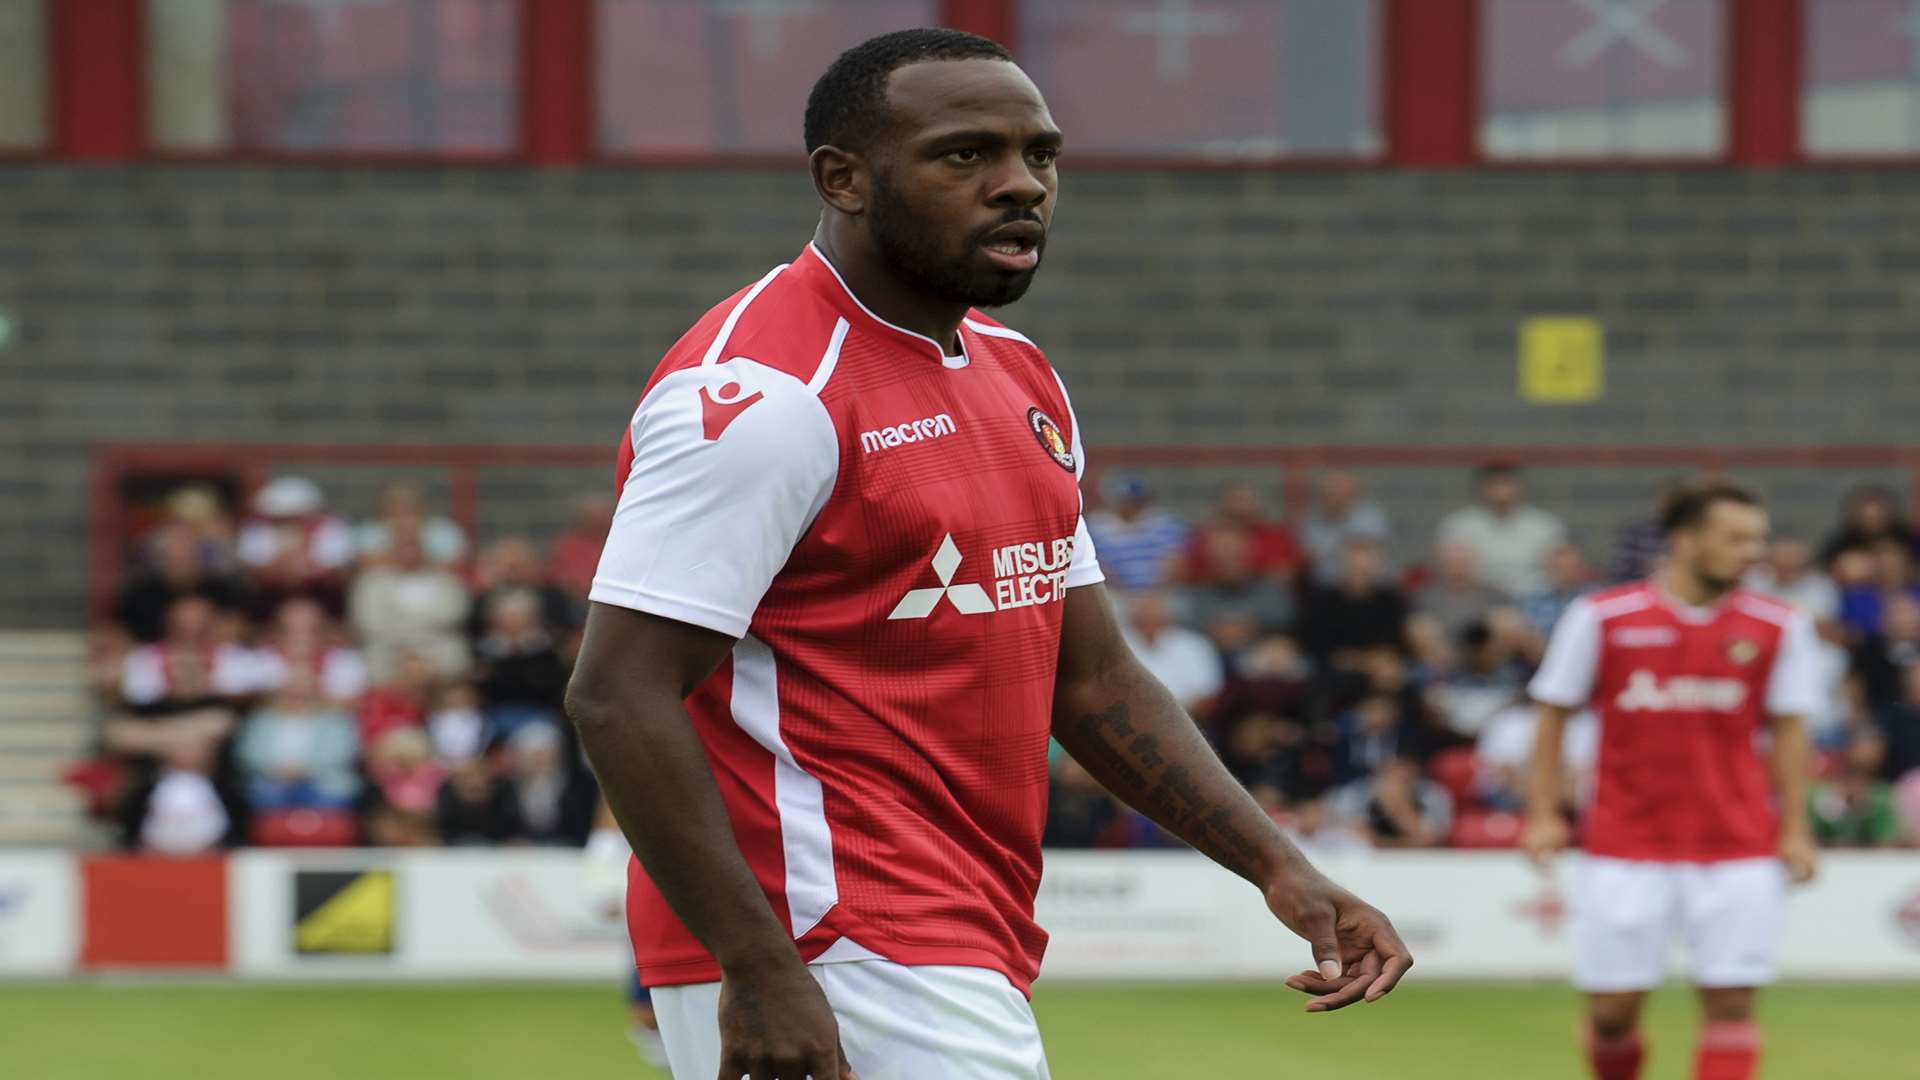 Myles Weston scored Ebbsfleet's first goal at Solihull Picture: Andy Payton